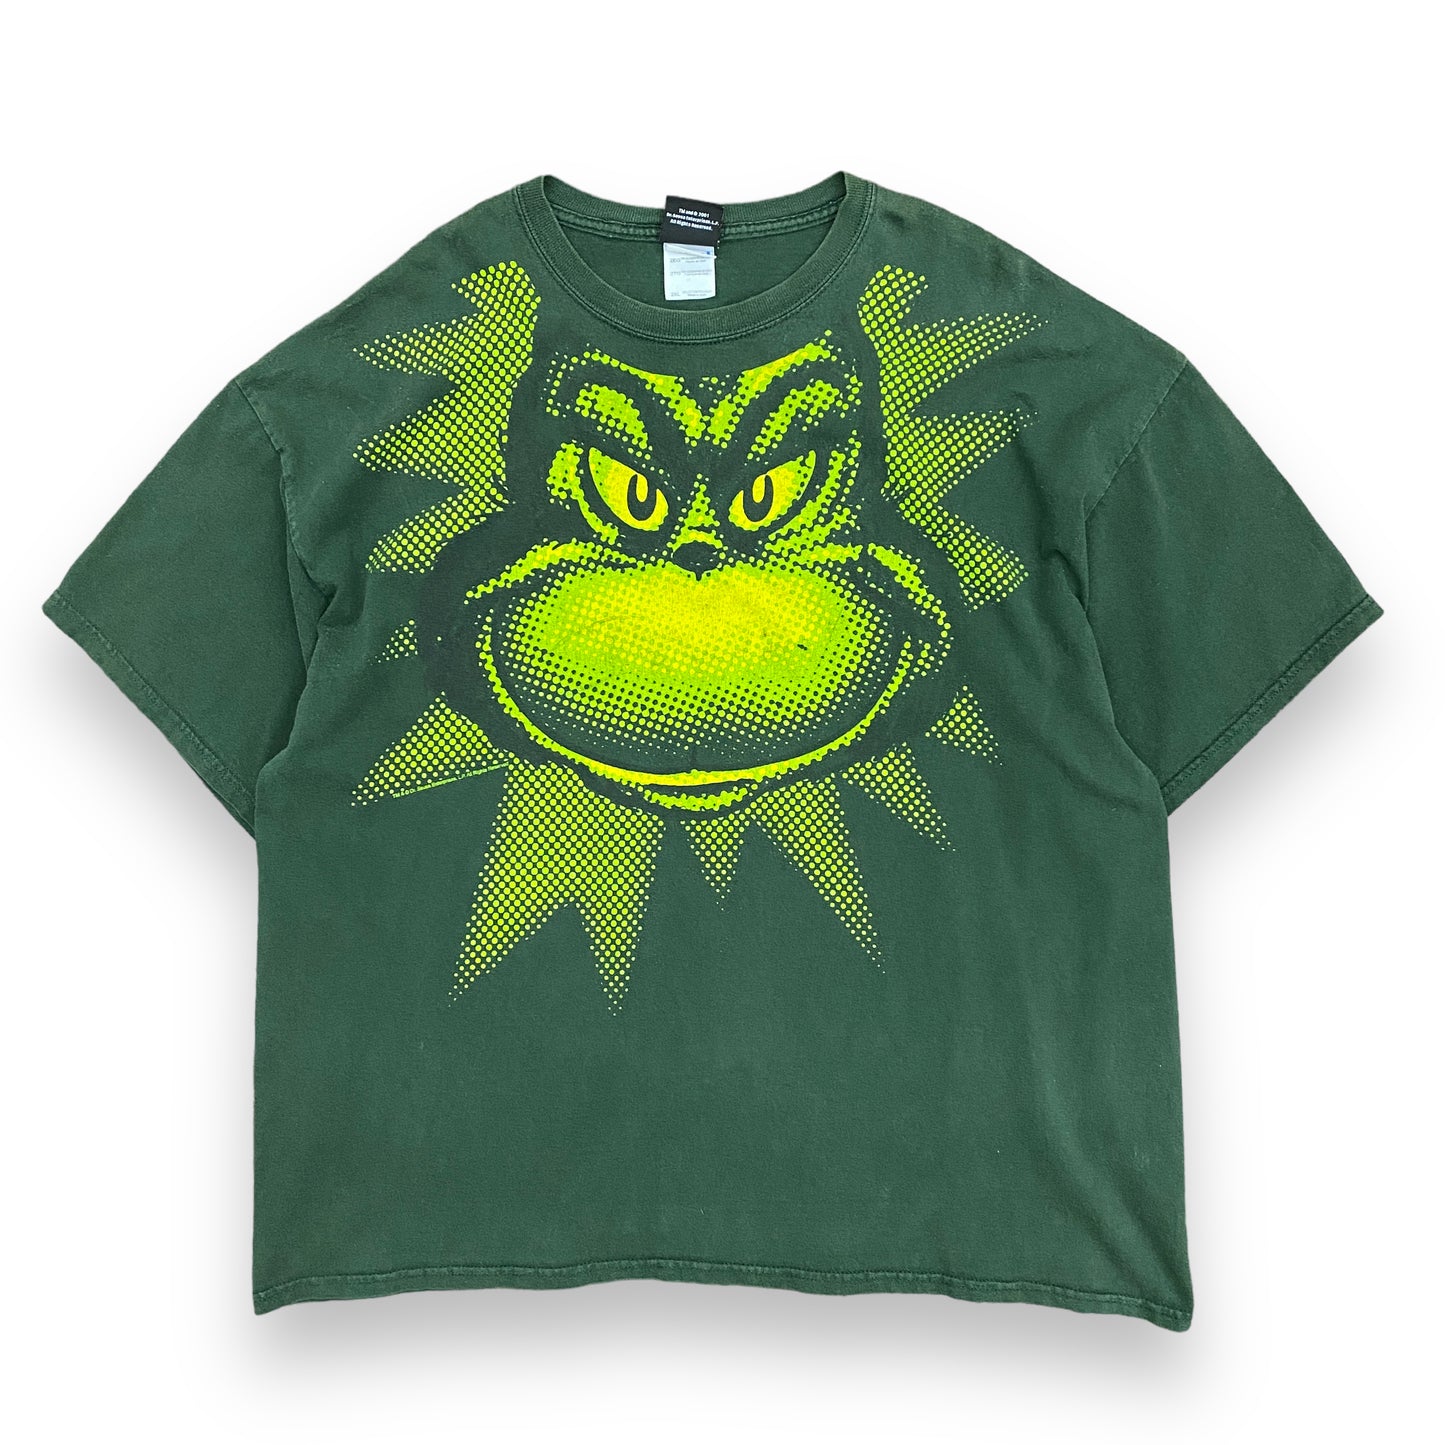 2001 The Grinch Big Face Green Tee - Size XXL (Fits boxy XL)